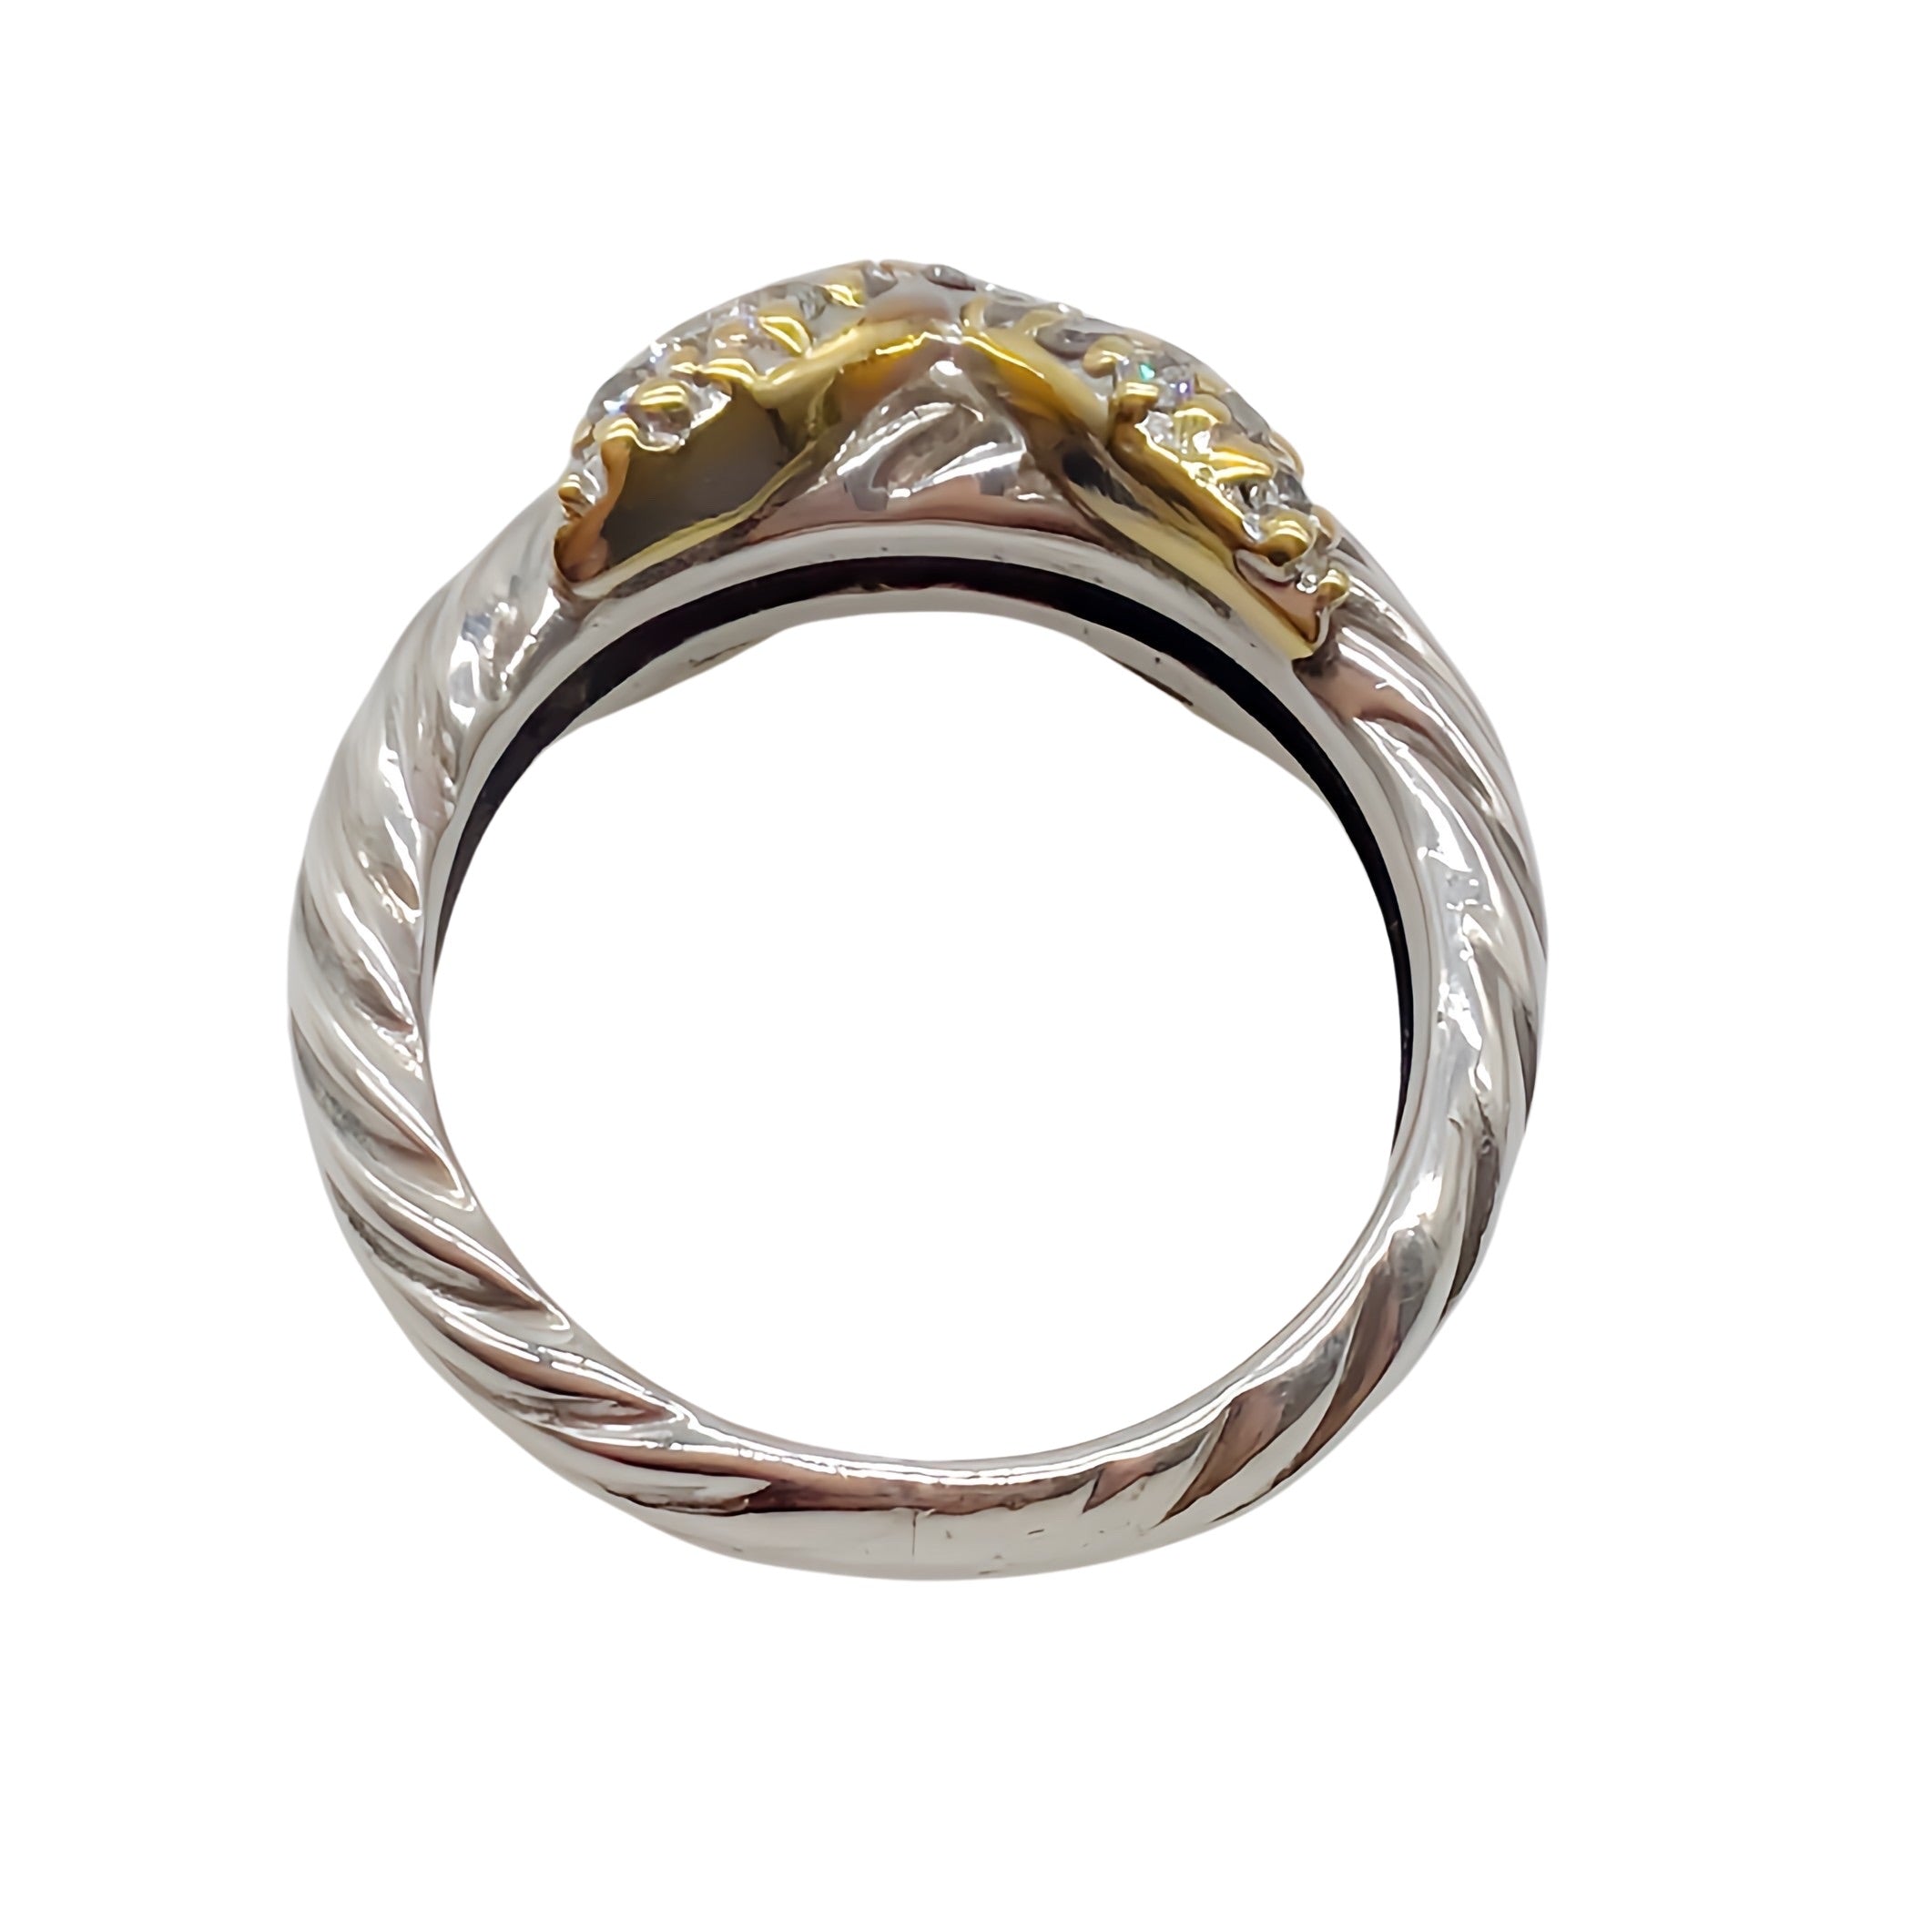 David Yurman 18K White Gold and Sterling X Ring with Diamonds